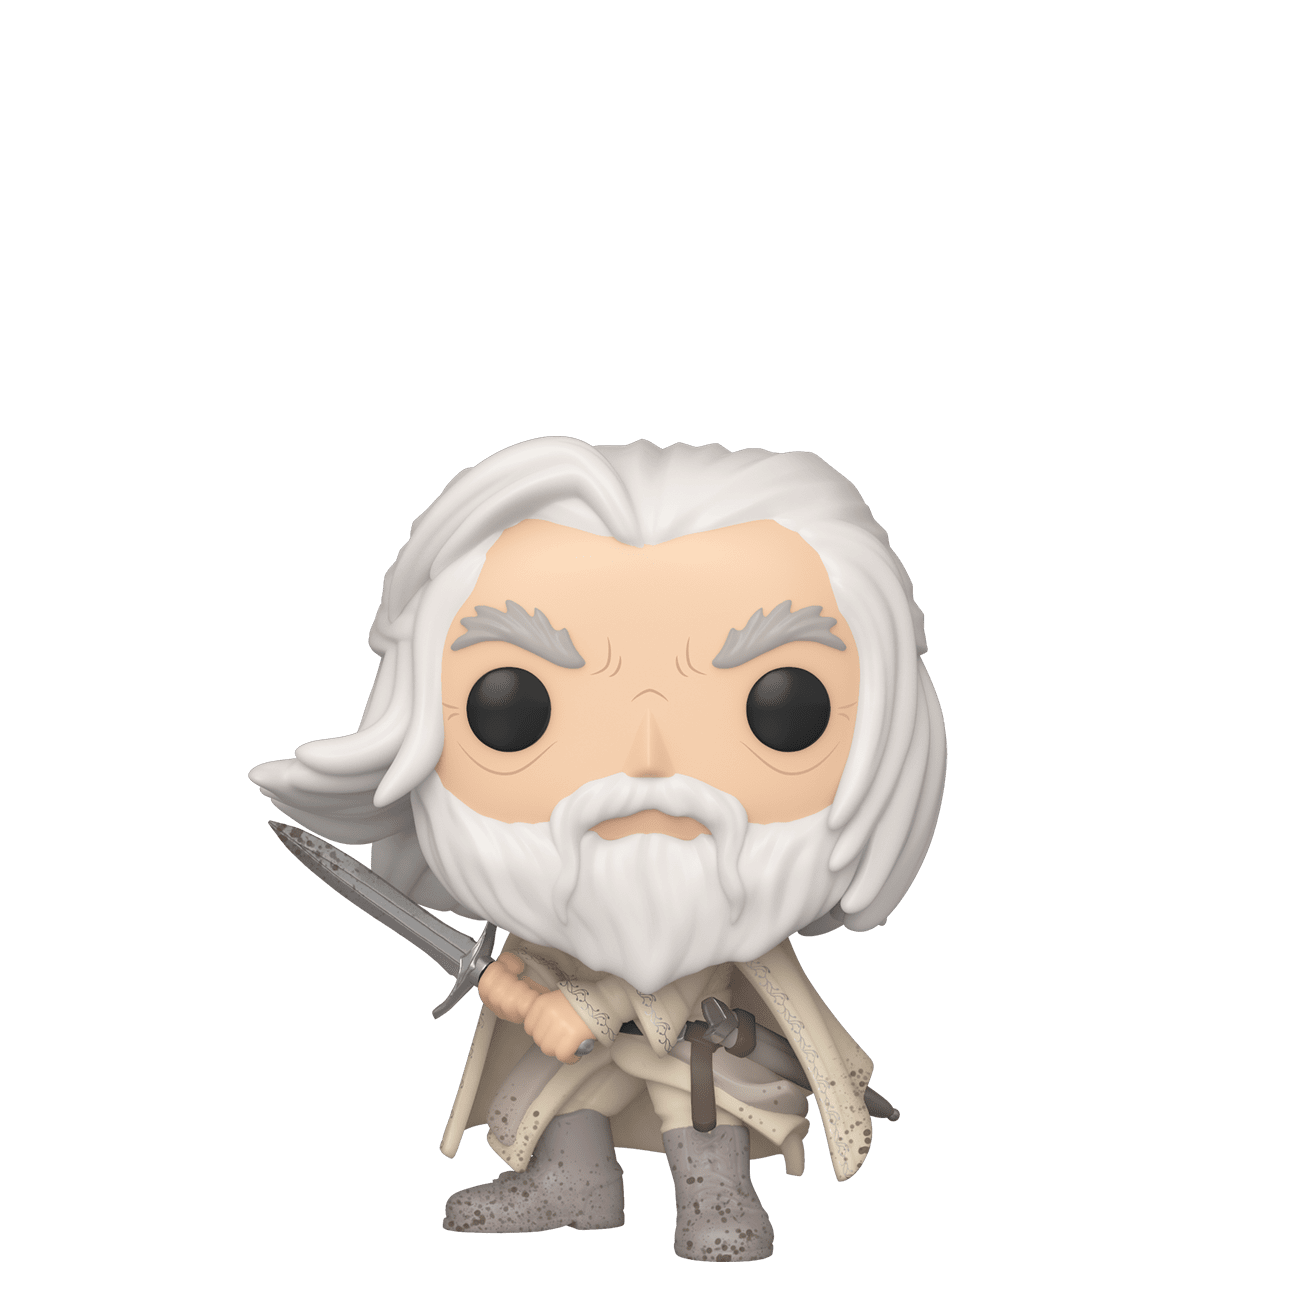 Funko Pop! Gandalf the White (The Lord of the Rings)